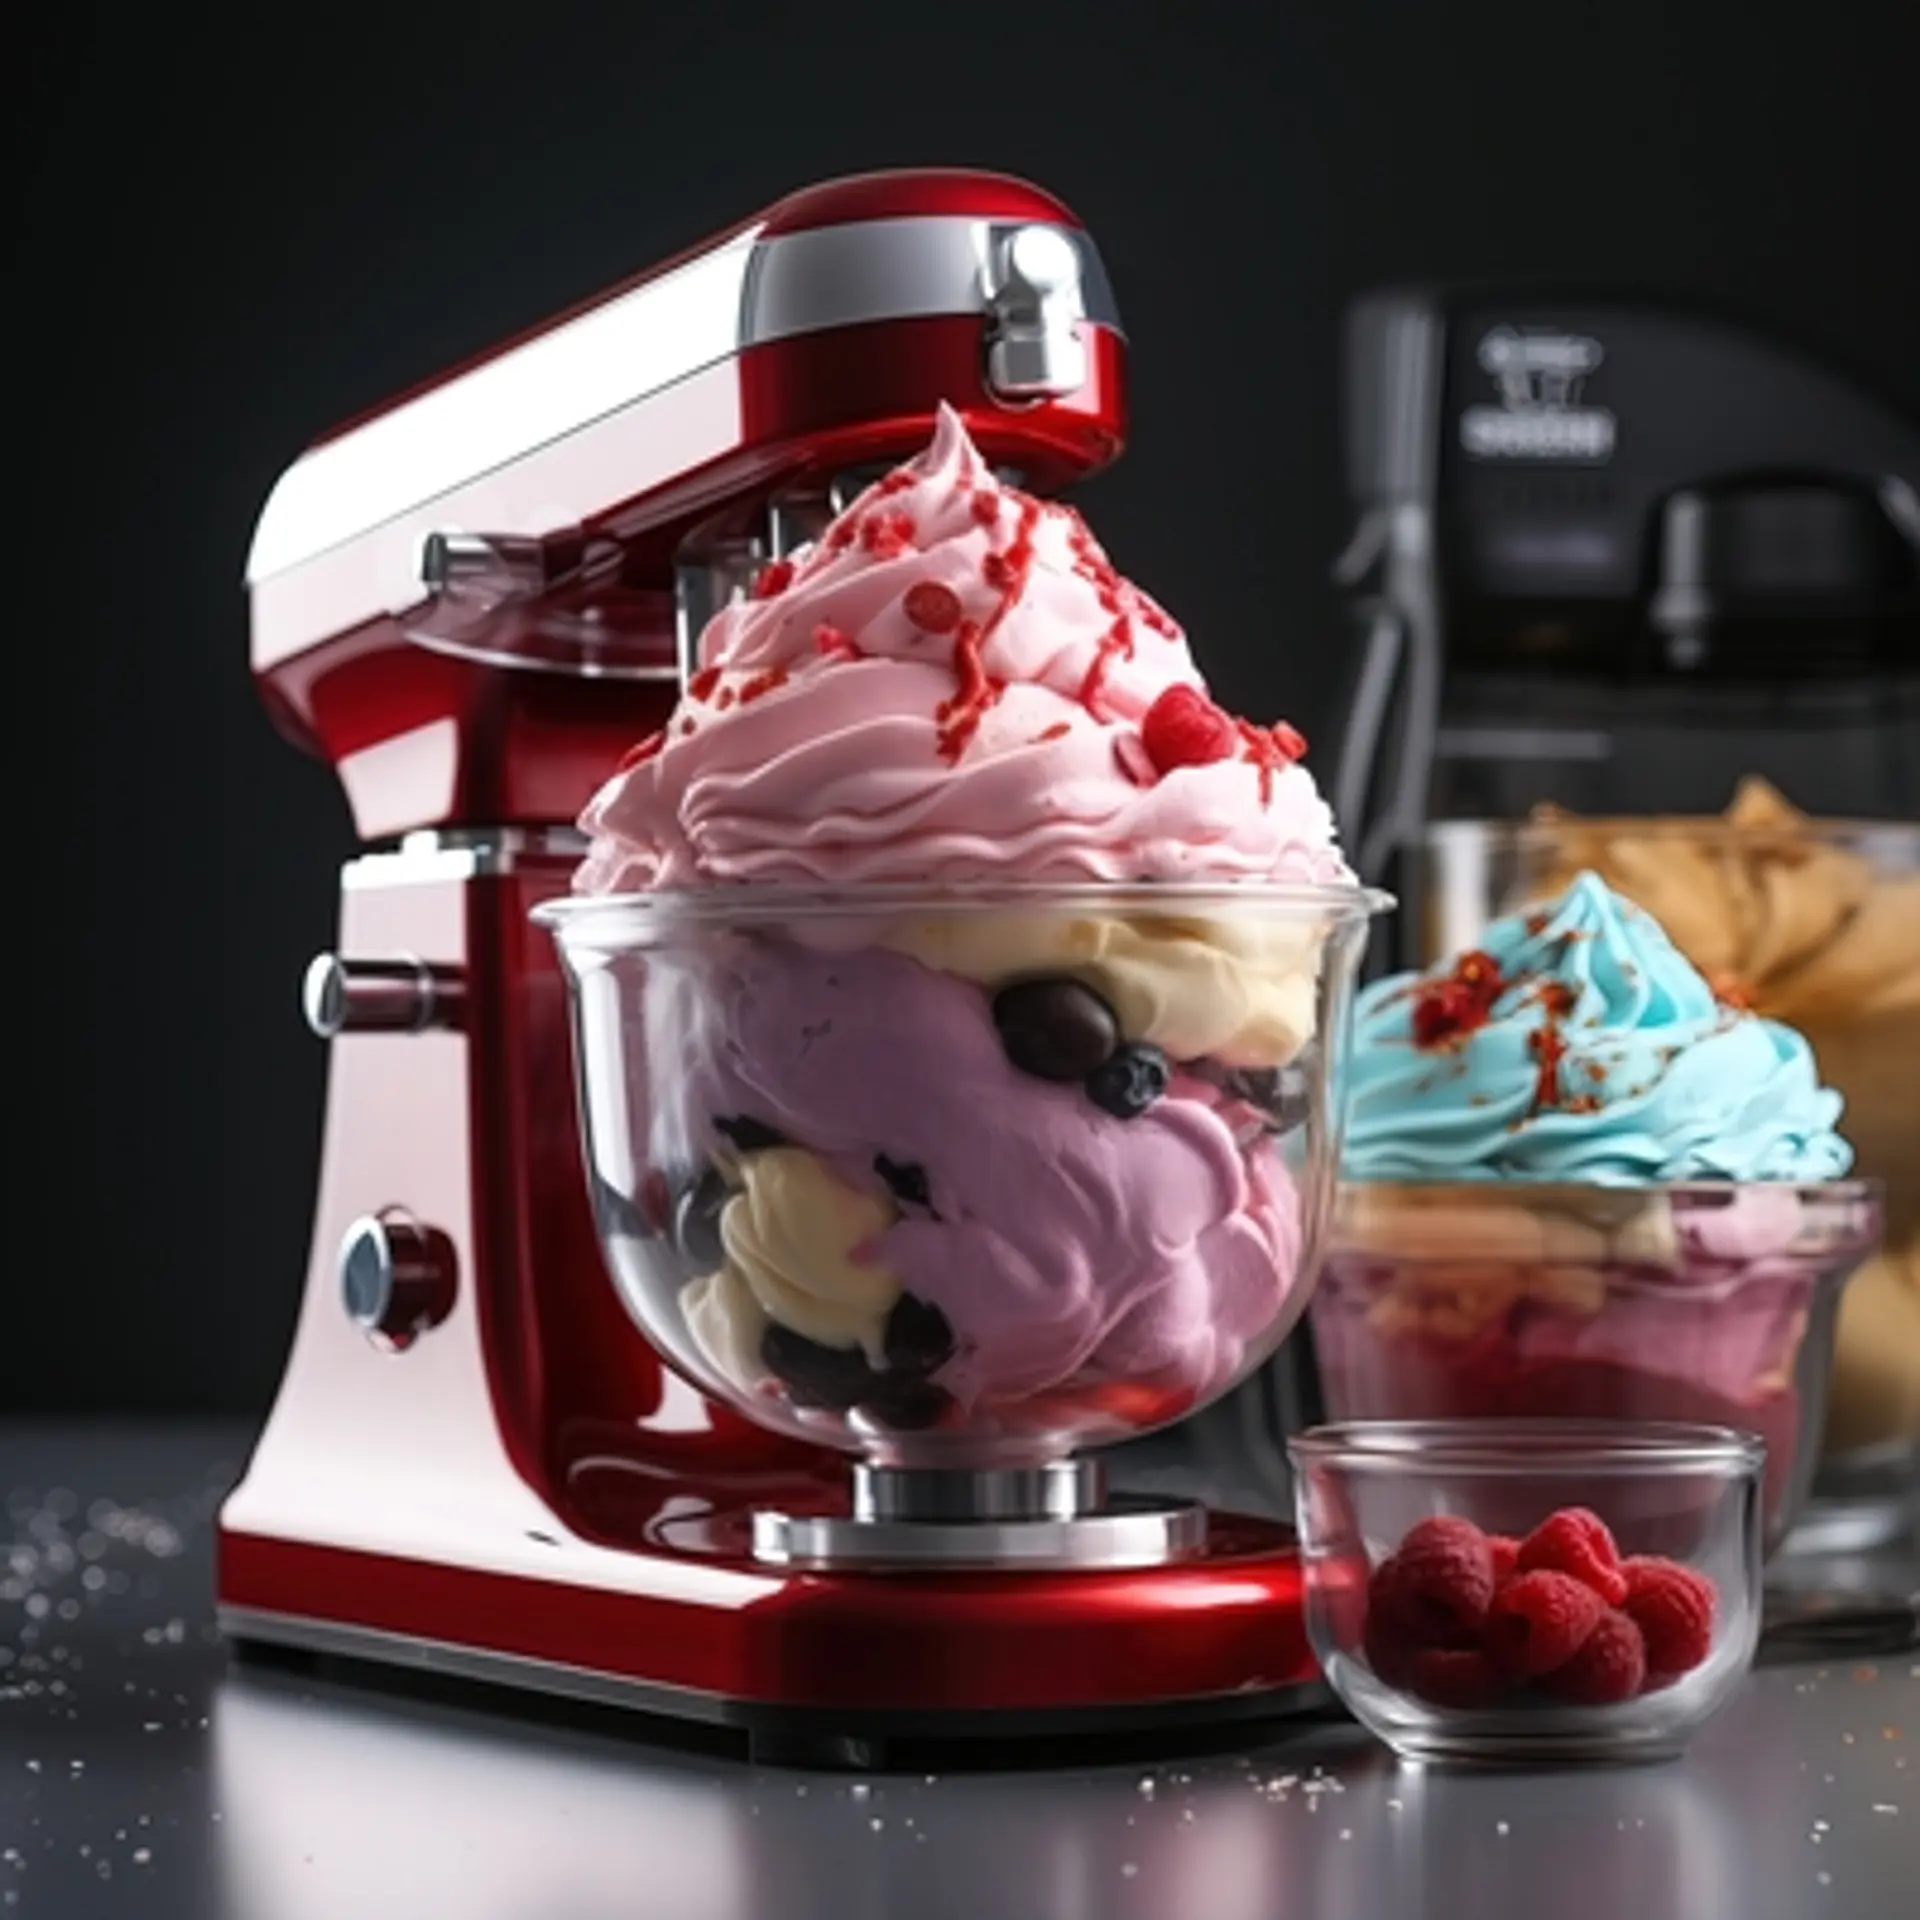 Delicious Homemade Ice Cream: Direct Drive Motor Blending Technology